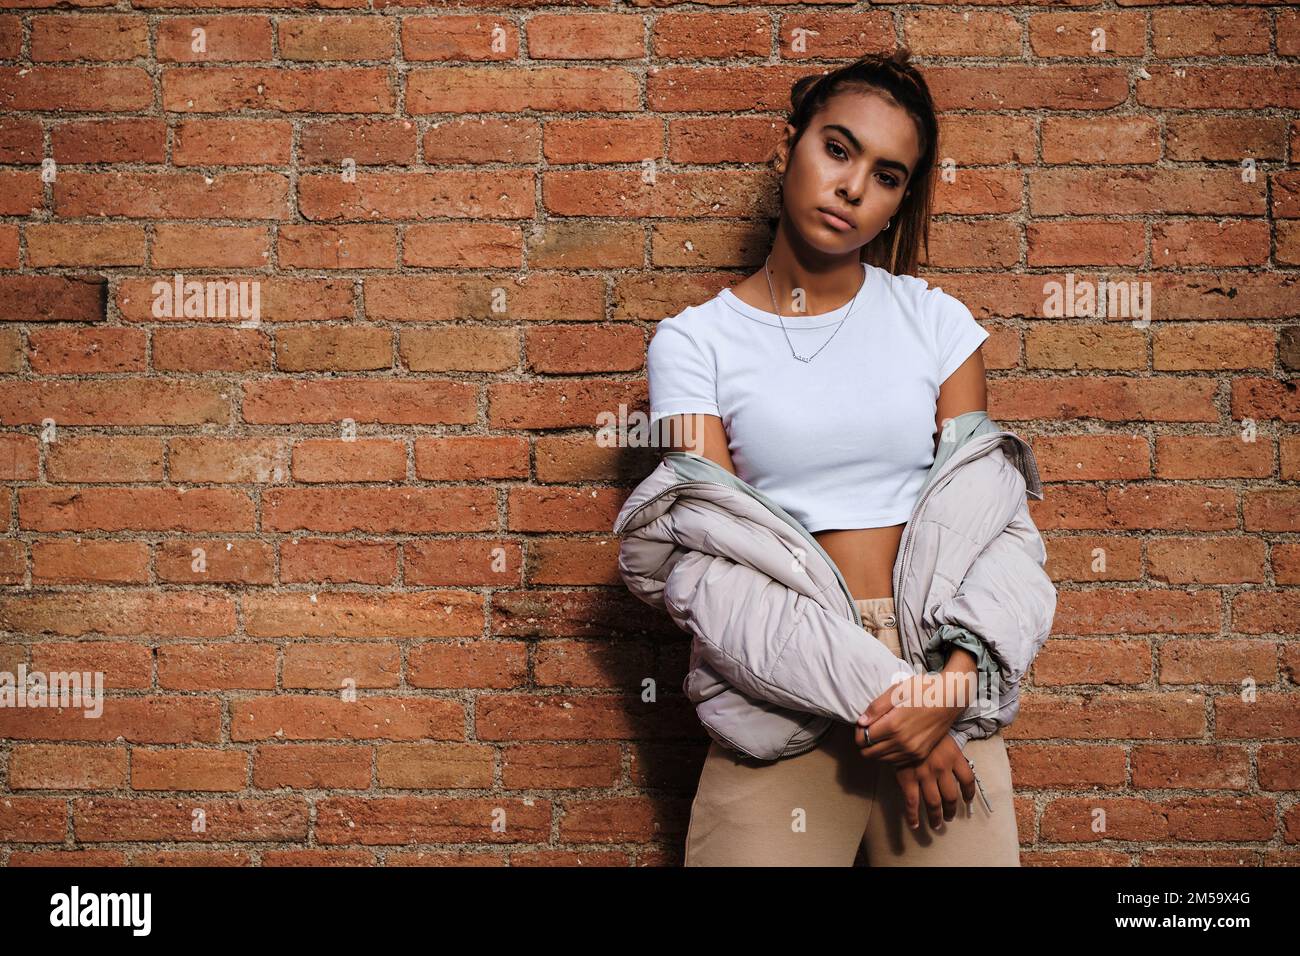 Young woman looking at the camera while posing against a brick wall. Stock Photo